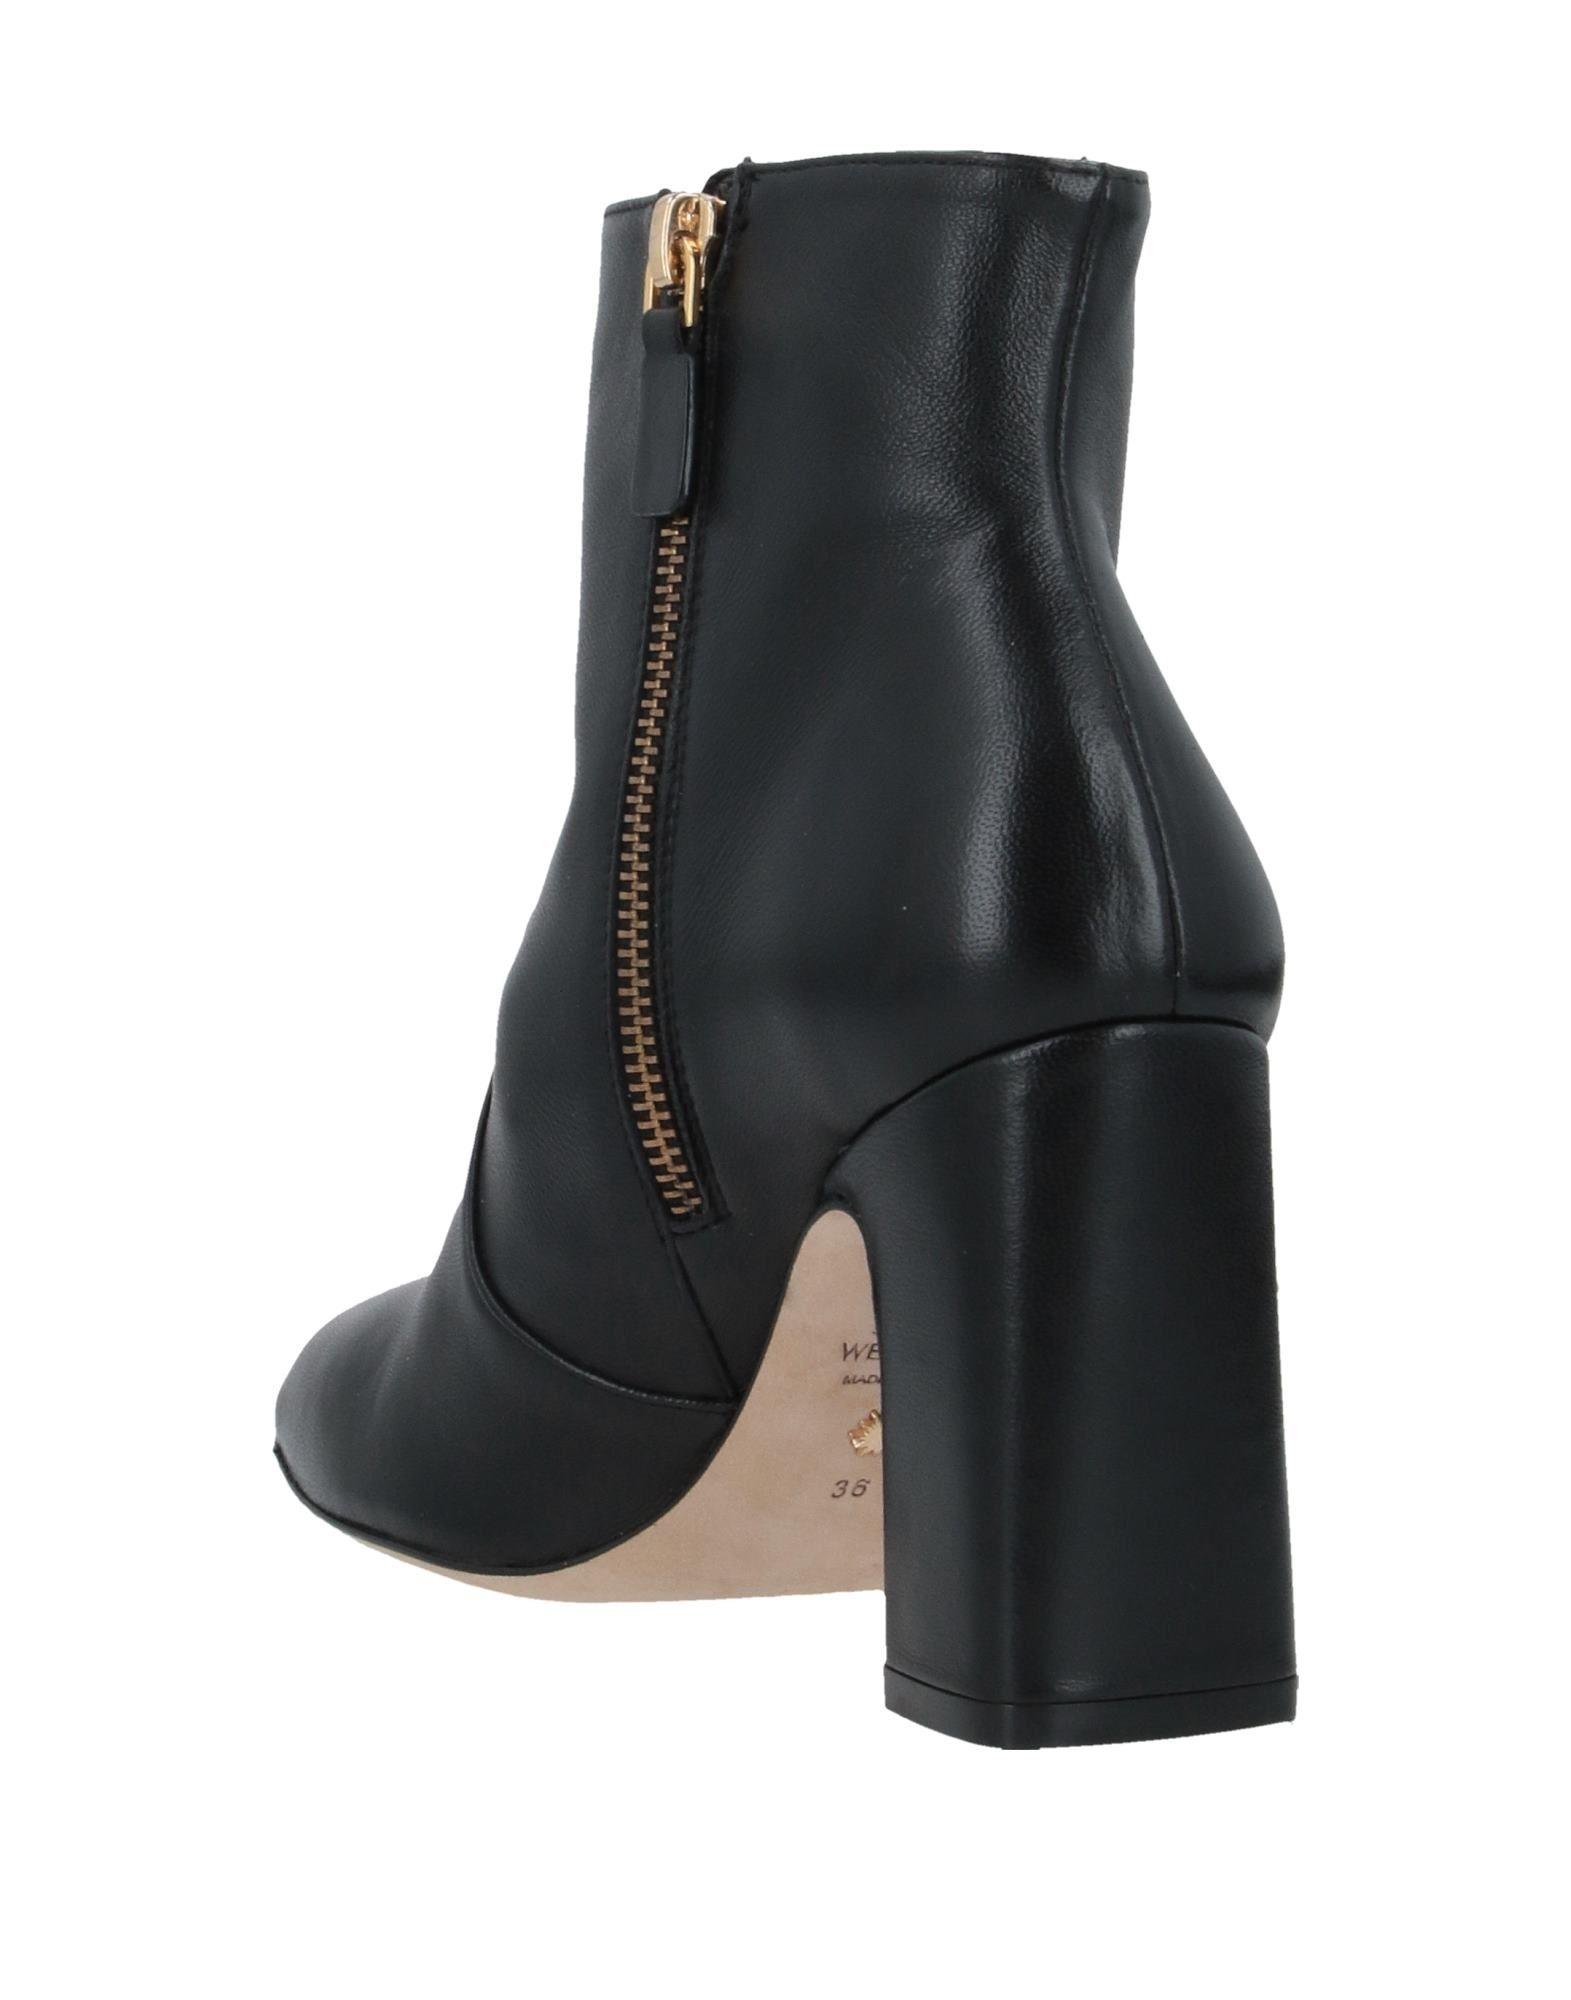 Stuart Weitzman Leather Ankle Boots in Black - Lyst